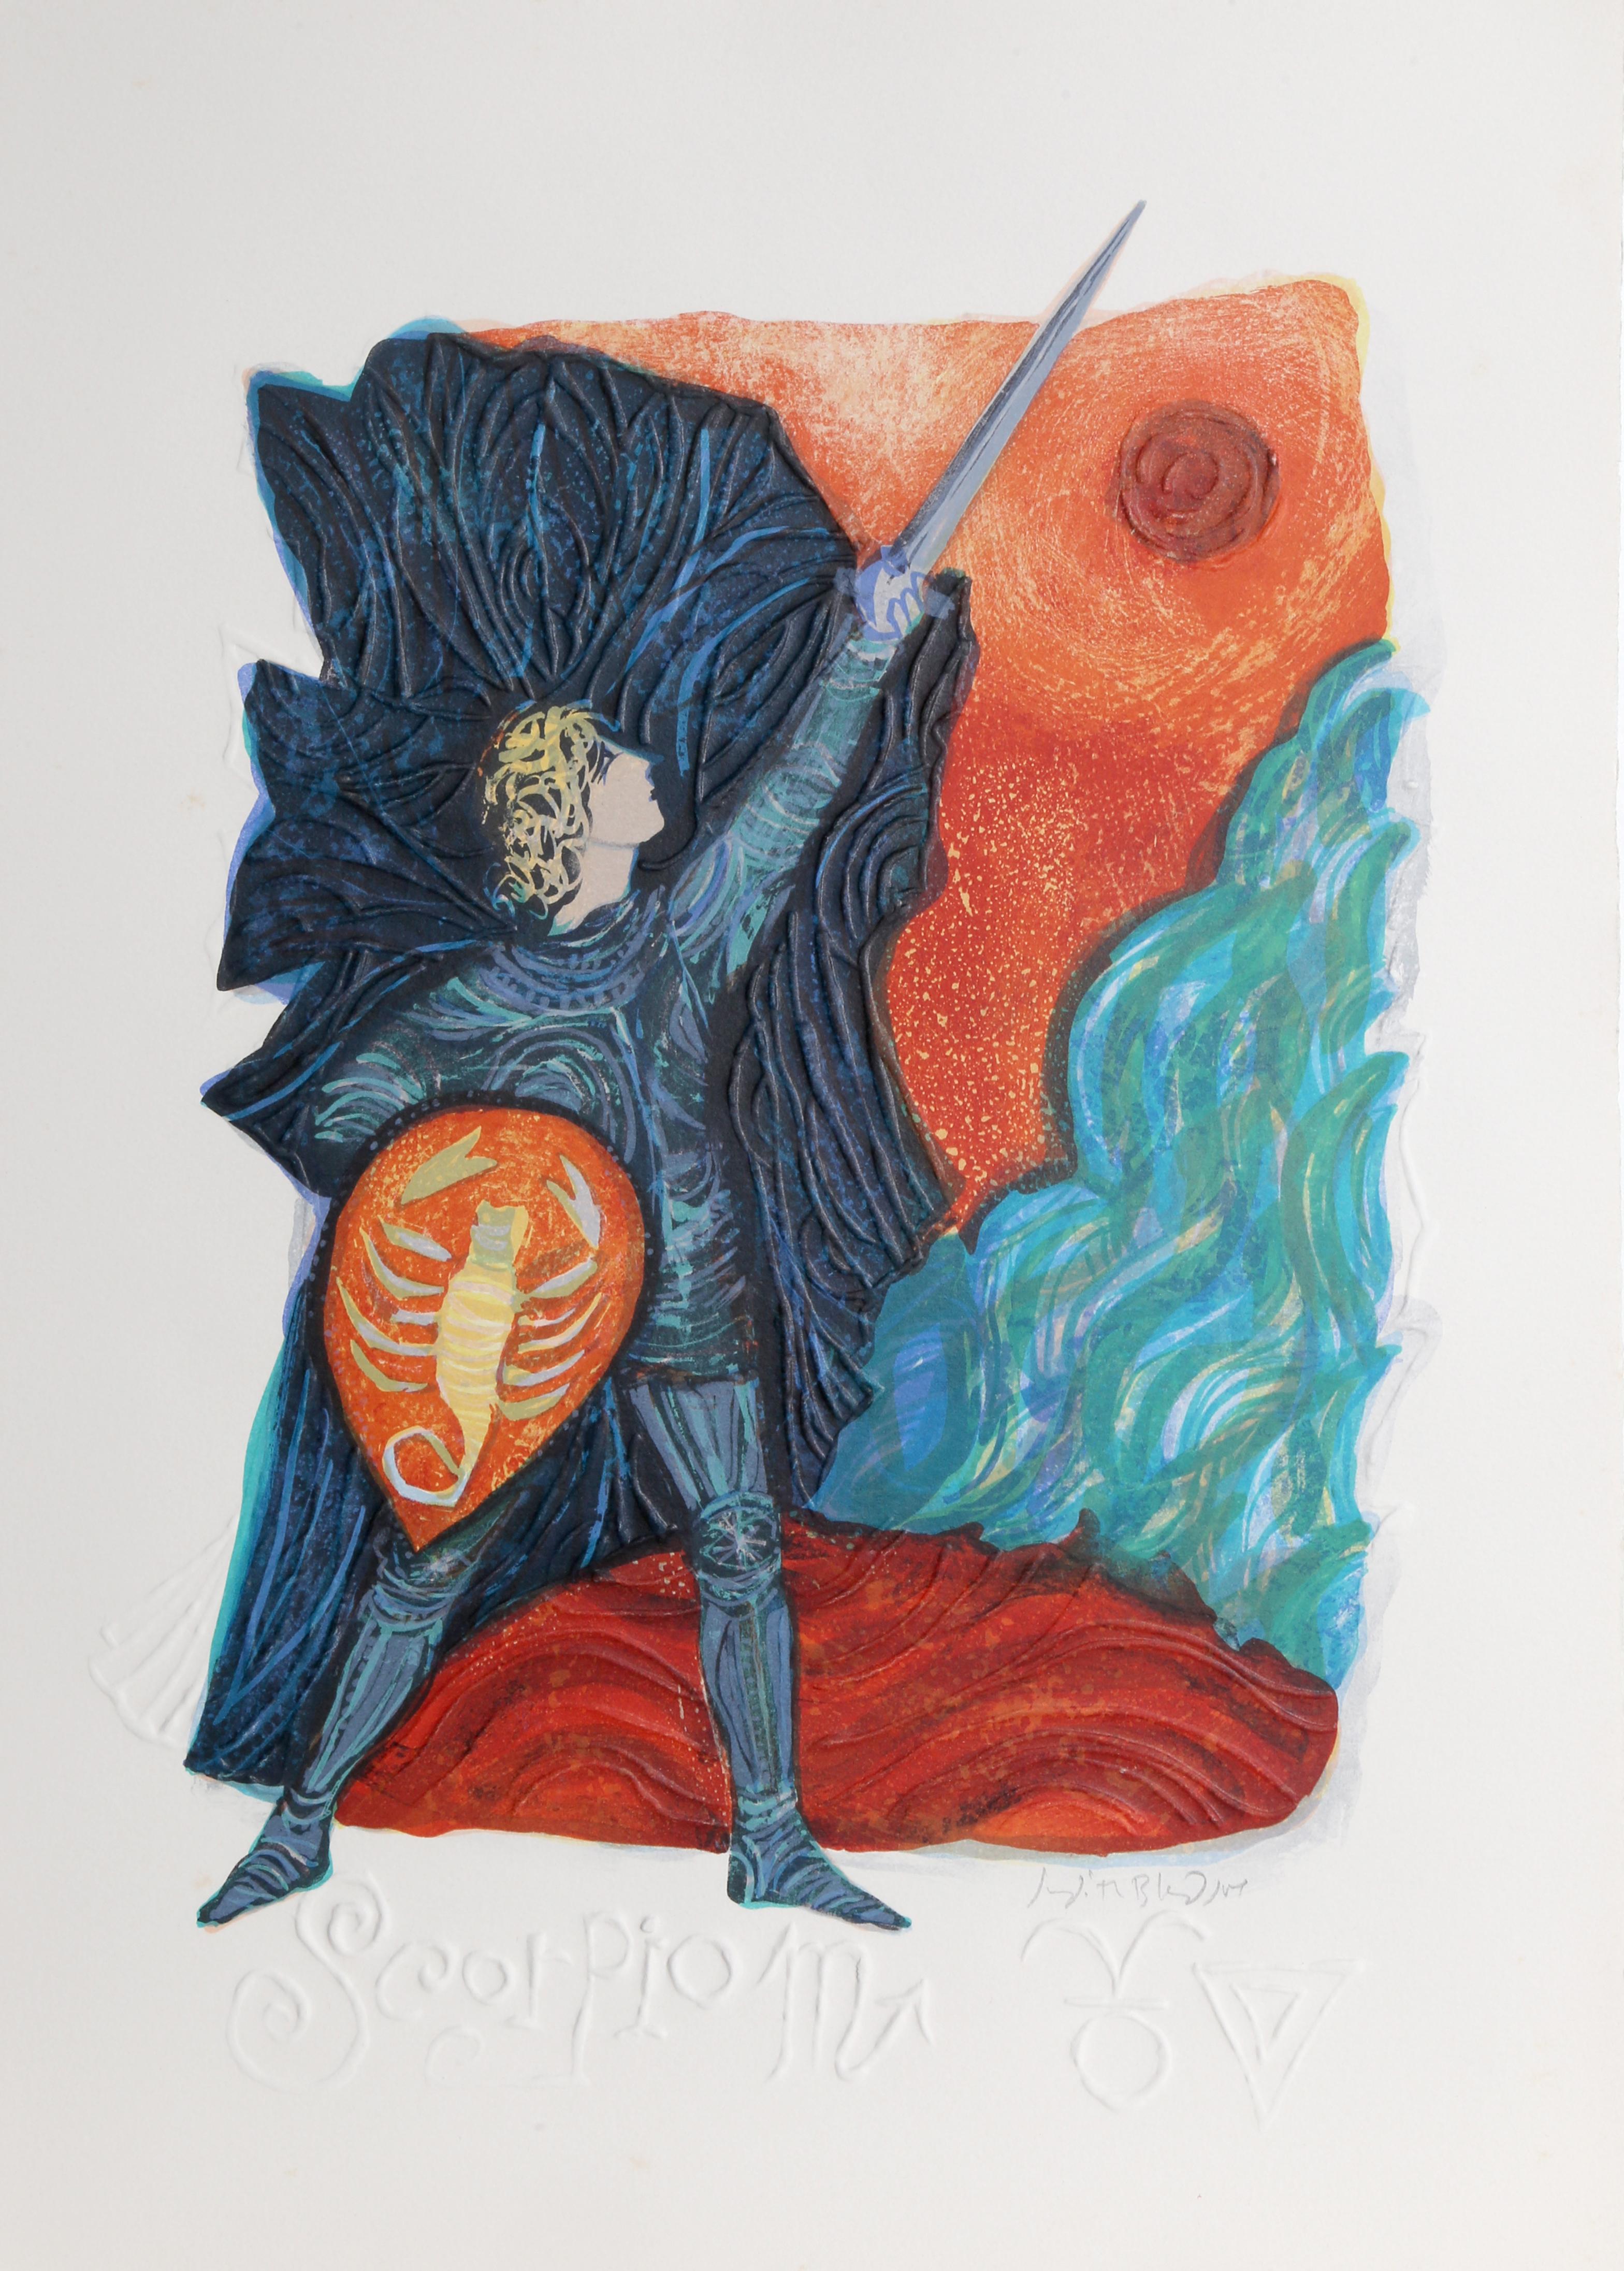 Judith Bledsoe’s astrological series would not be complete without her colorful and inspiring depiction of Scorpio, featuring a knight holding a shield with the sign emblazoned on it and thrusting a sword to the sky.

Scorpio from the Zodiac of